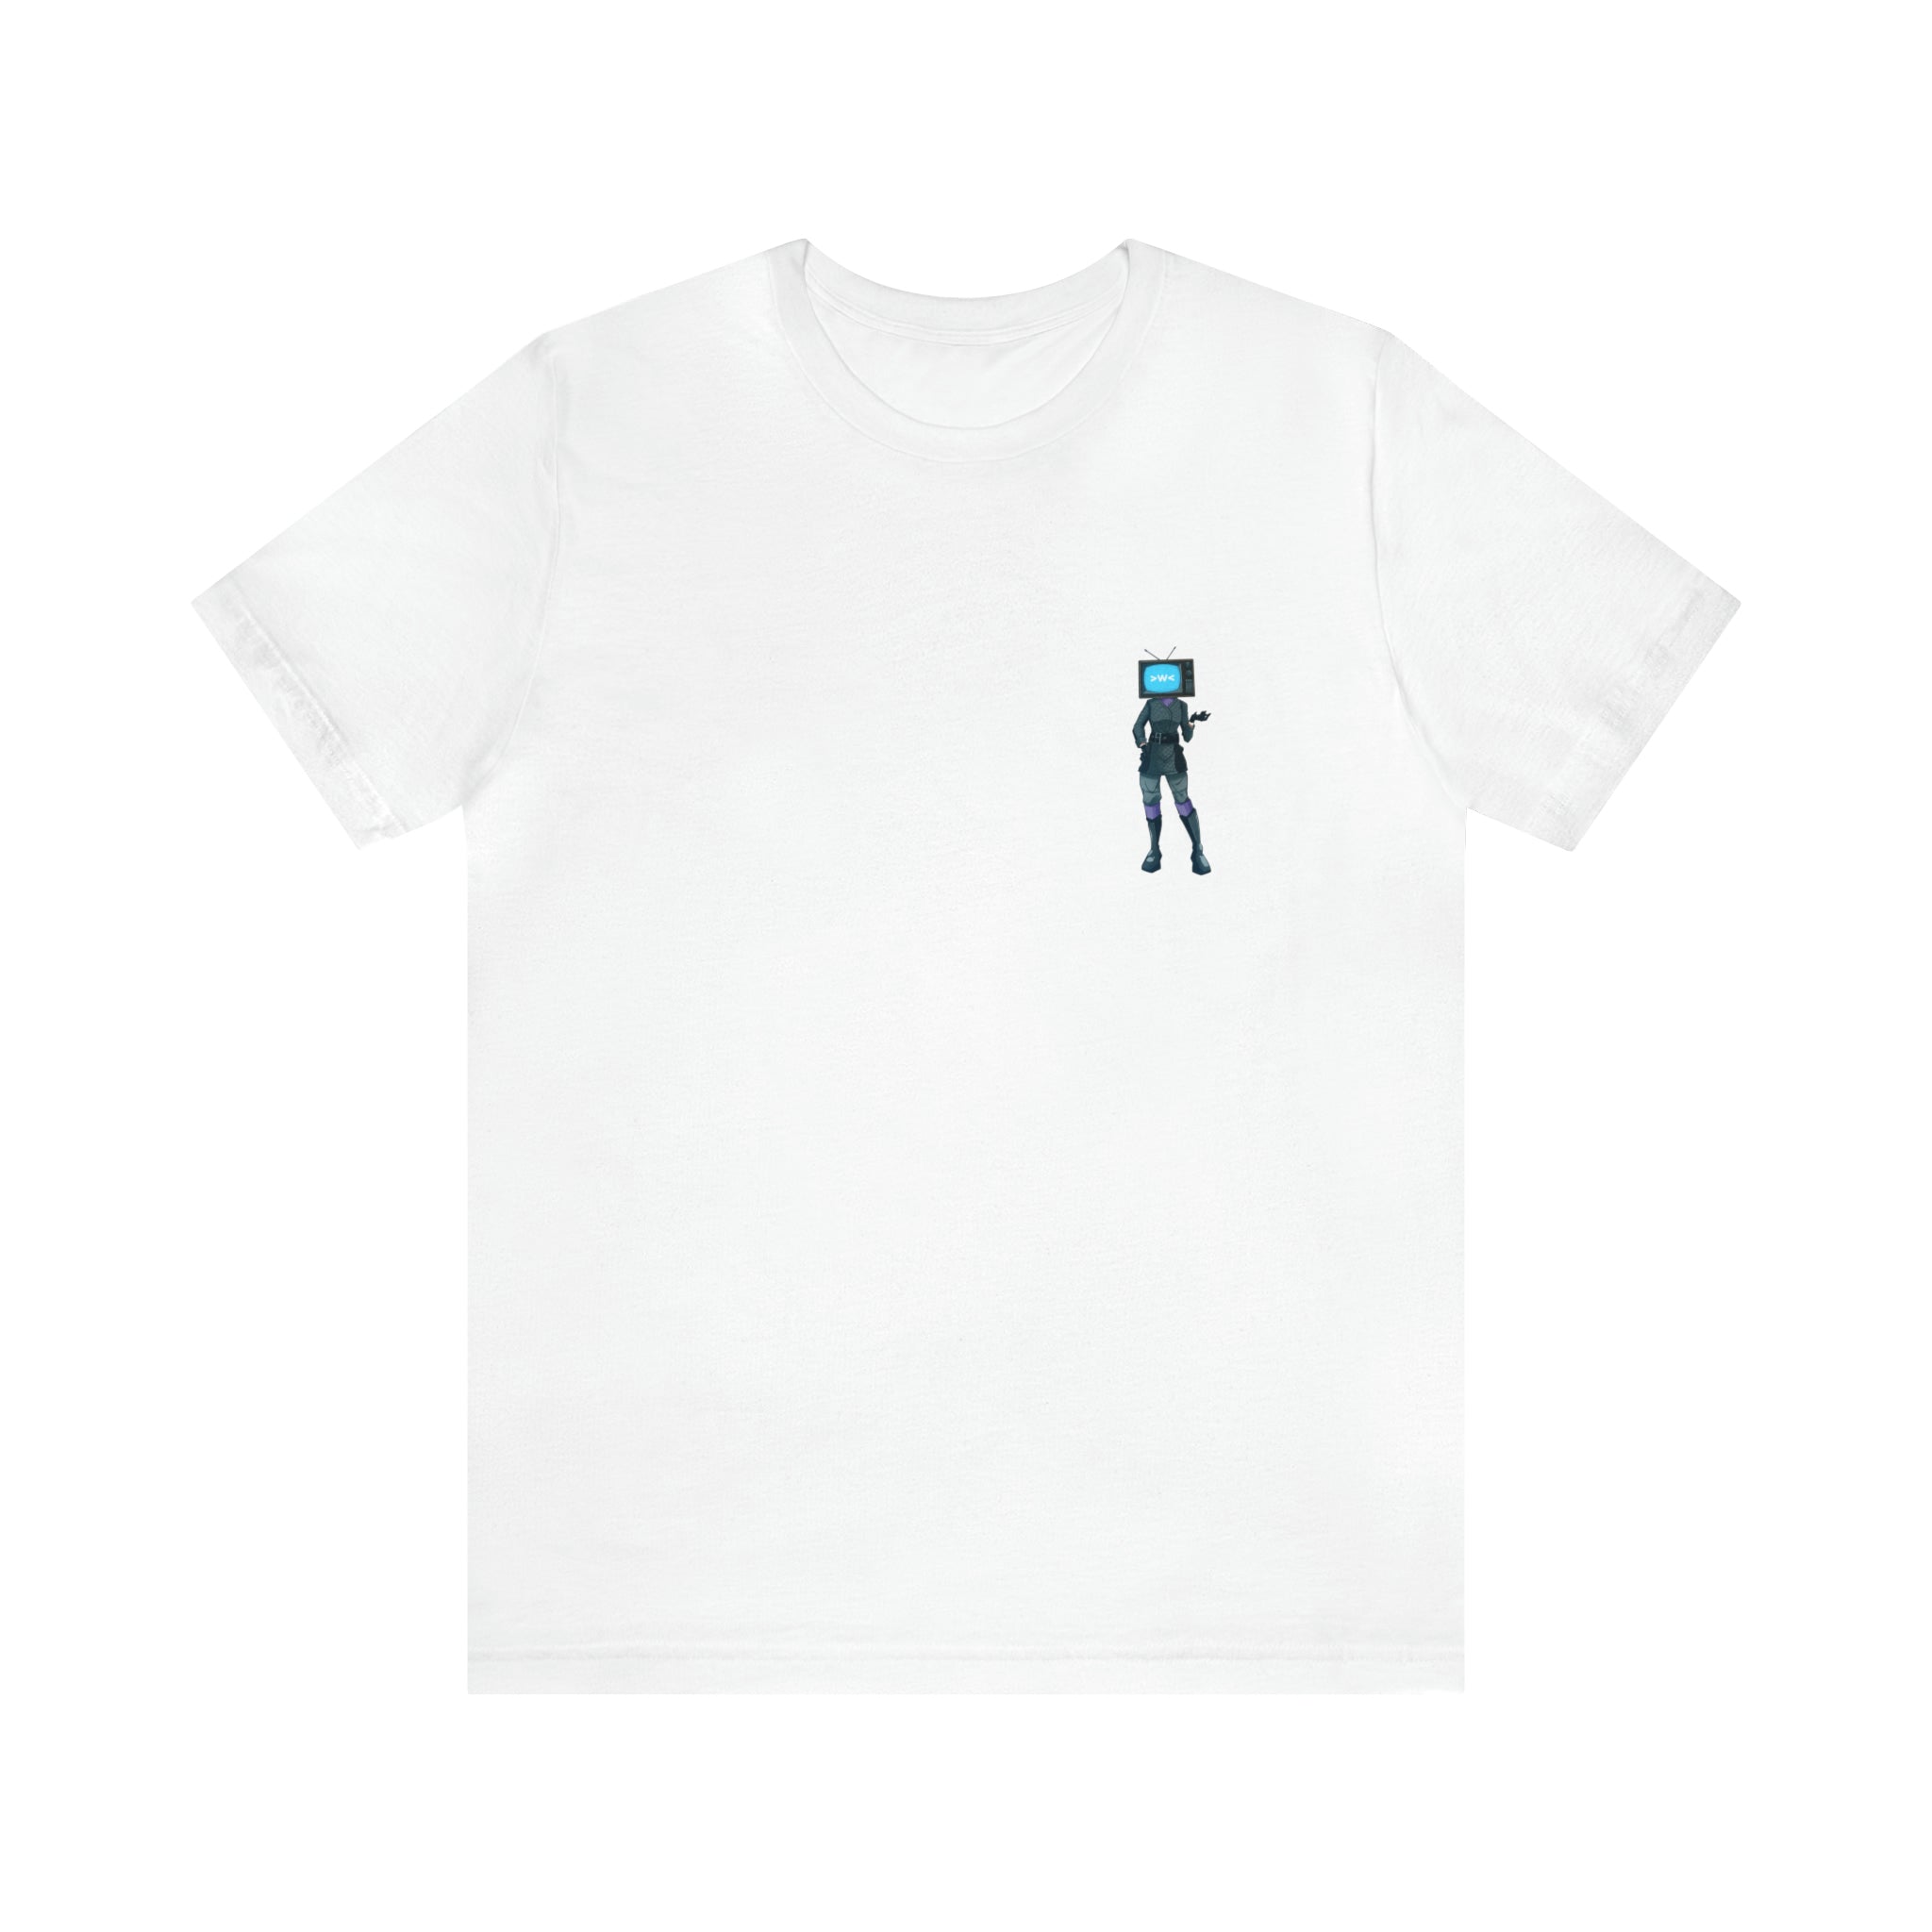 TV Woman in anime style on white tee